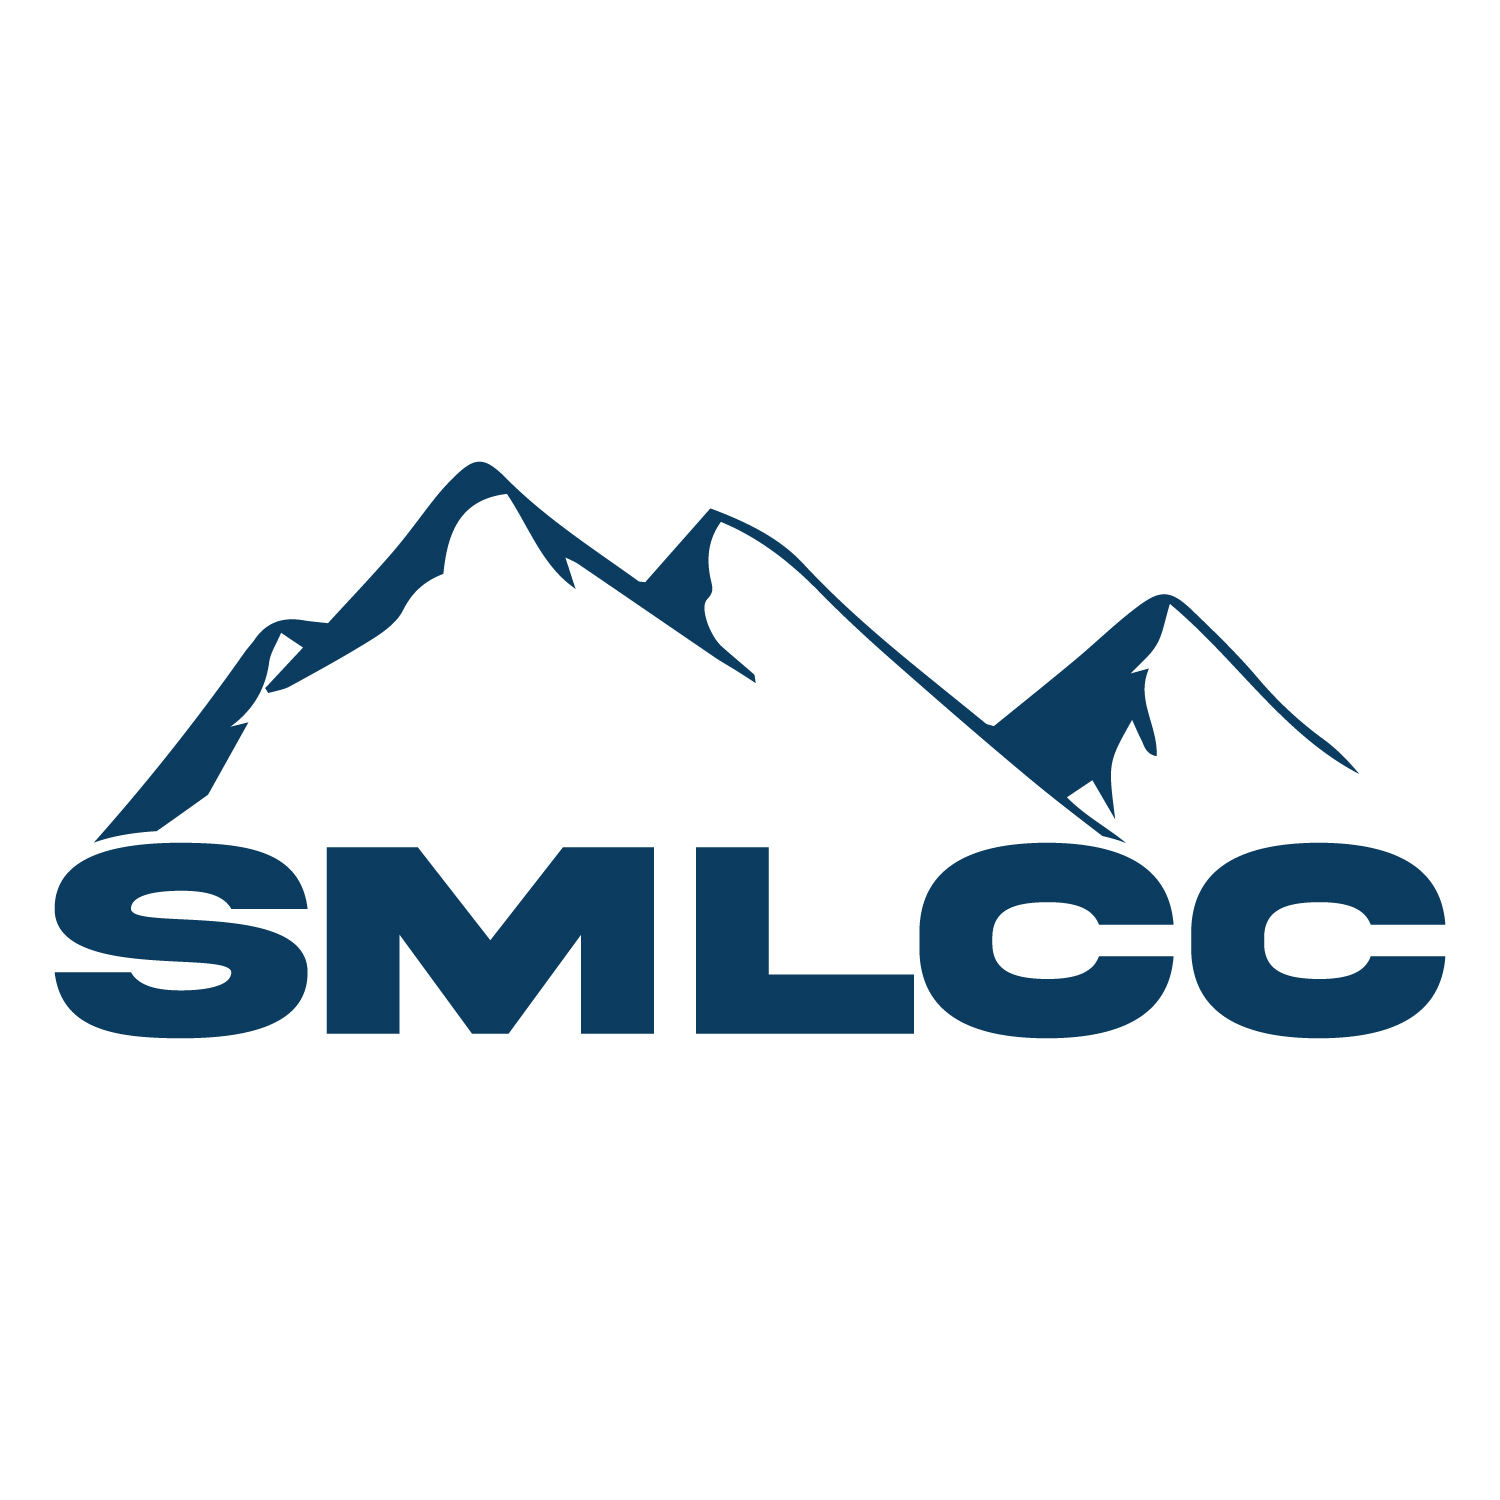 Logo for South Mountain Laveen Chamber of Commerce - Moutain outline with the SMLCC across the base in a dark blue on a white background.